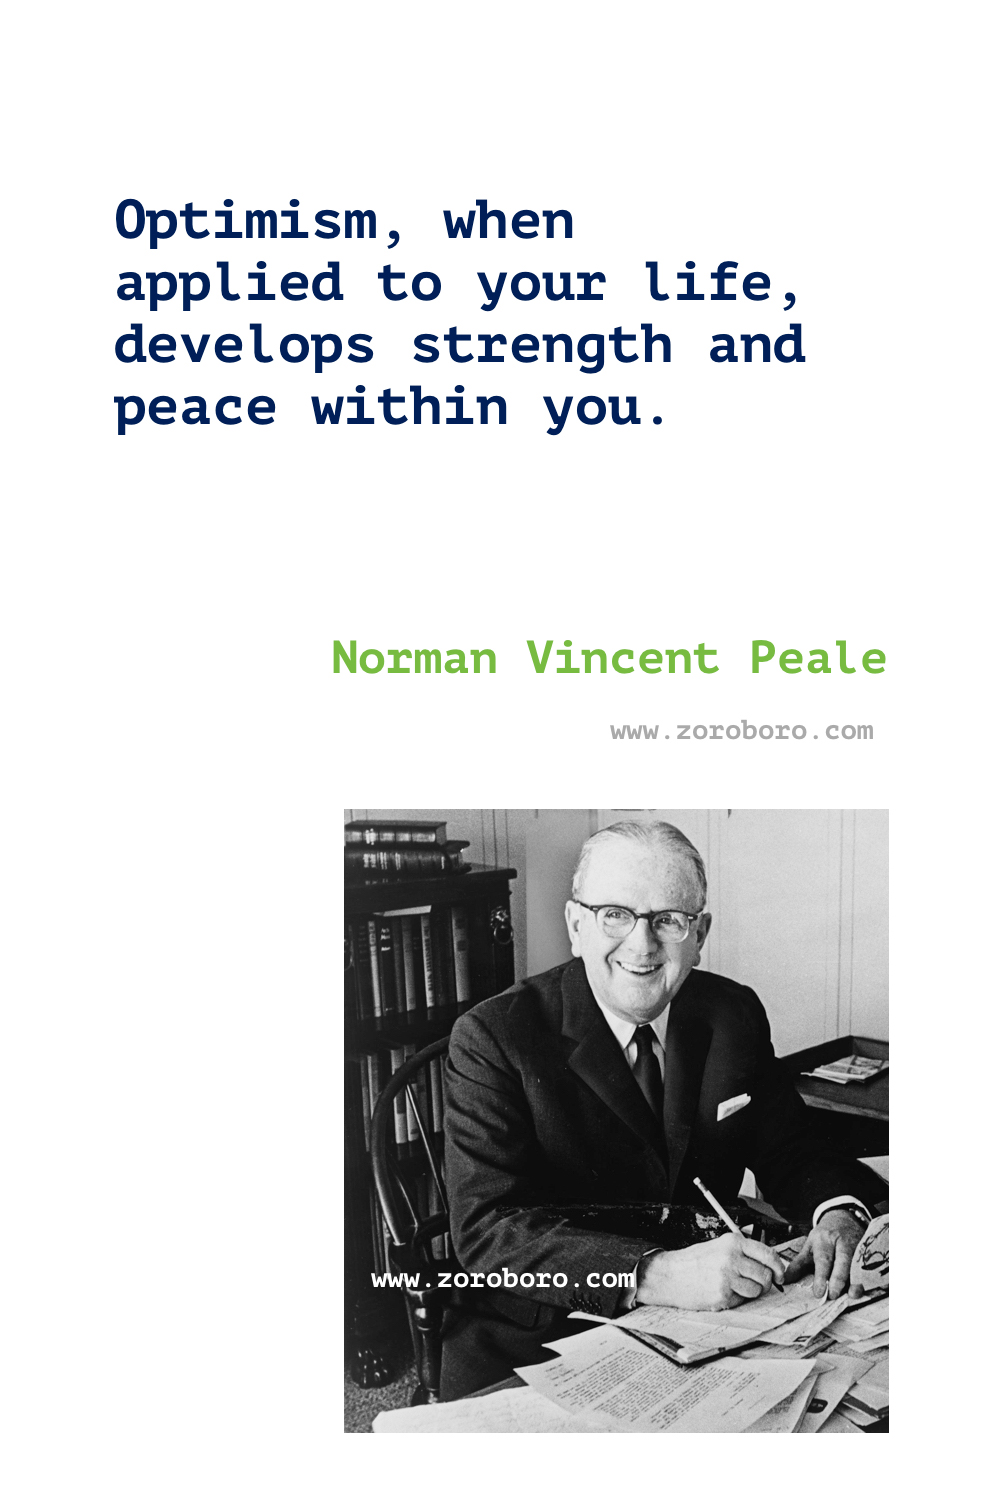 Norman Vincent Peale Quotes. The Power of Positive Thinking. Norman Vincent Peale Books Quotes. Norman Vincent Peale Inspirational Quotes. Norman Vincent Peale Attitude Quotes, Norman Vincent Peale Enthusiasm Quotes, Giving Quotes, Norman Vincent Peale Motivational Quotes, Norman Vincent Peale Positive Quotes.